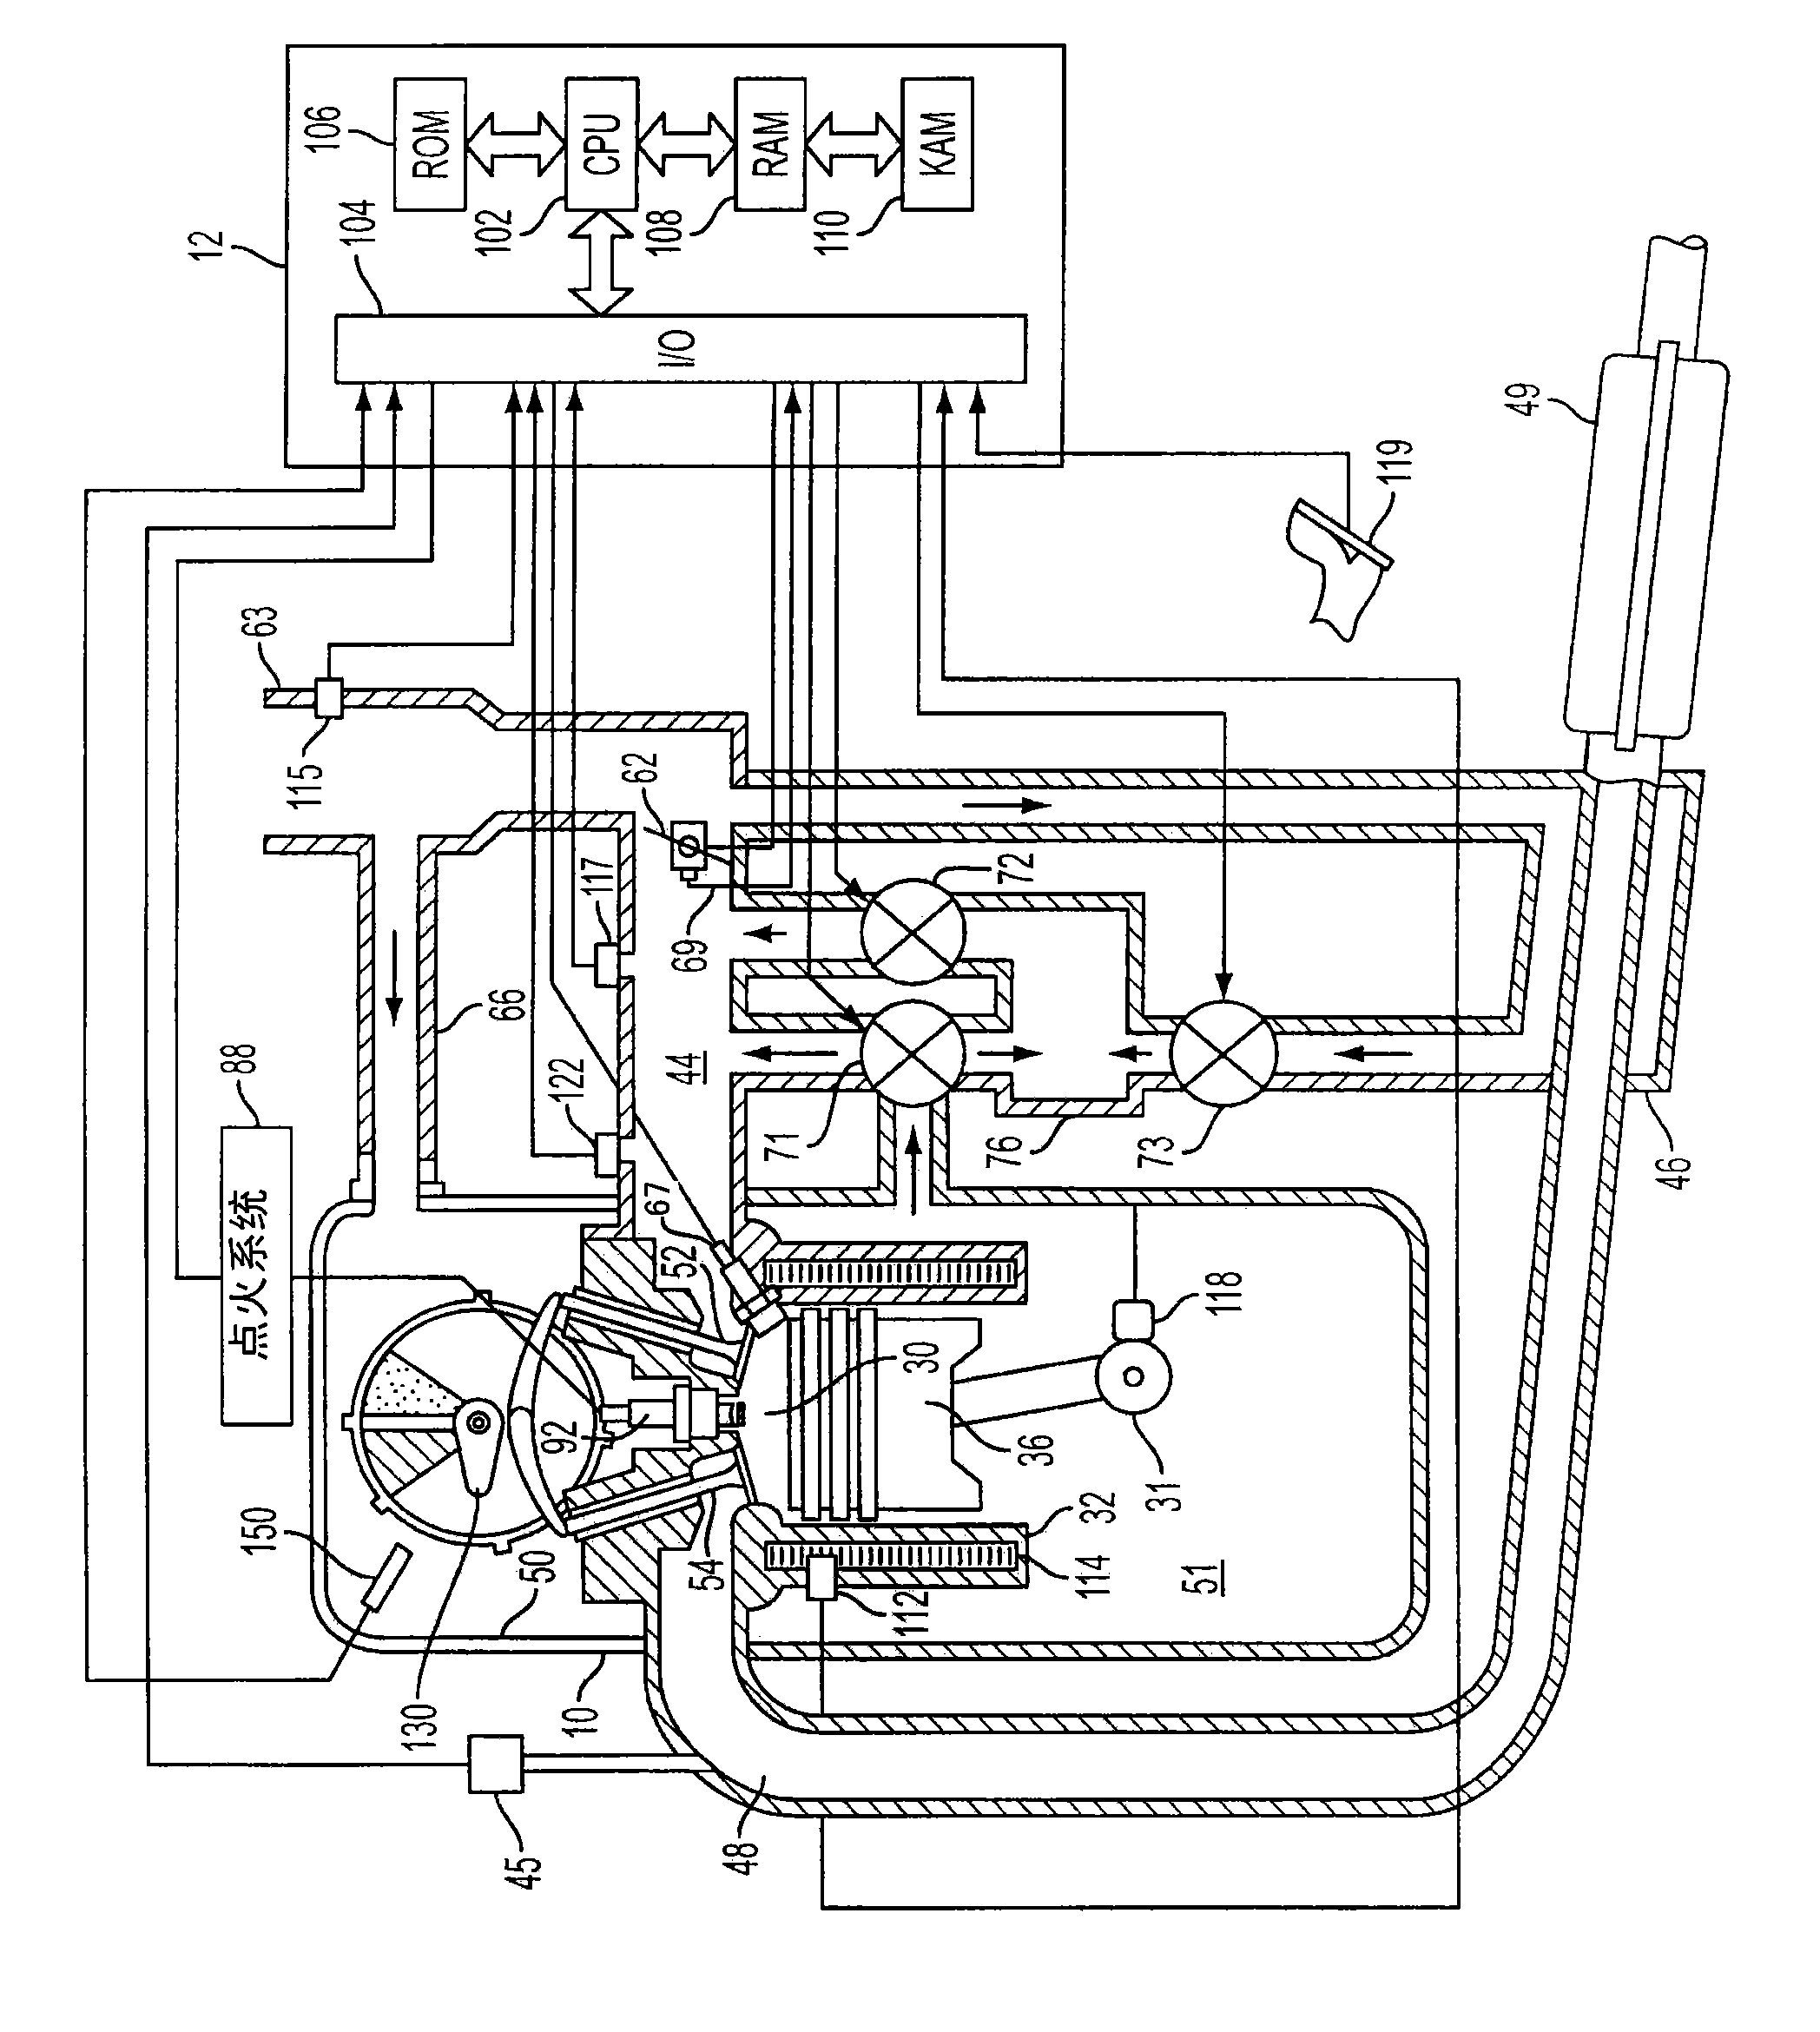 System and method for storing crankcase gases to improve engine air-fuel control